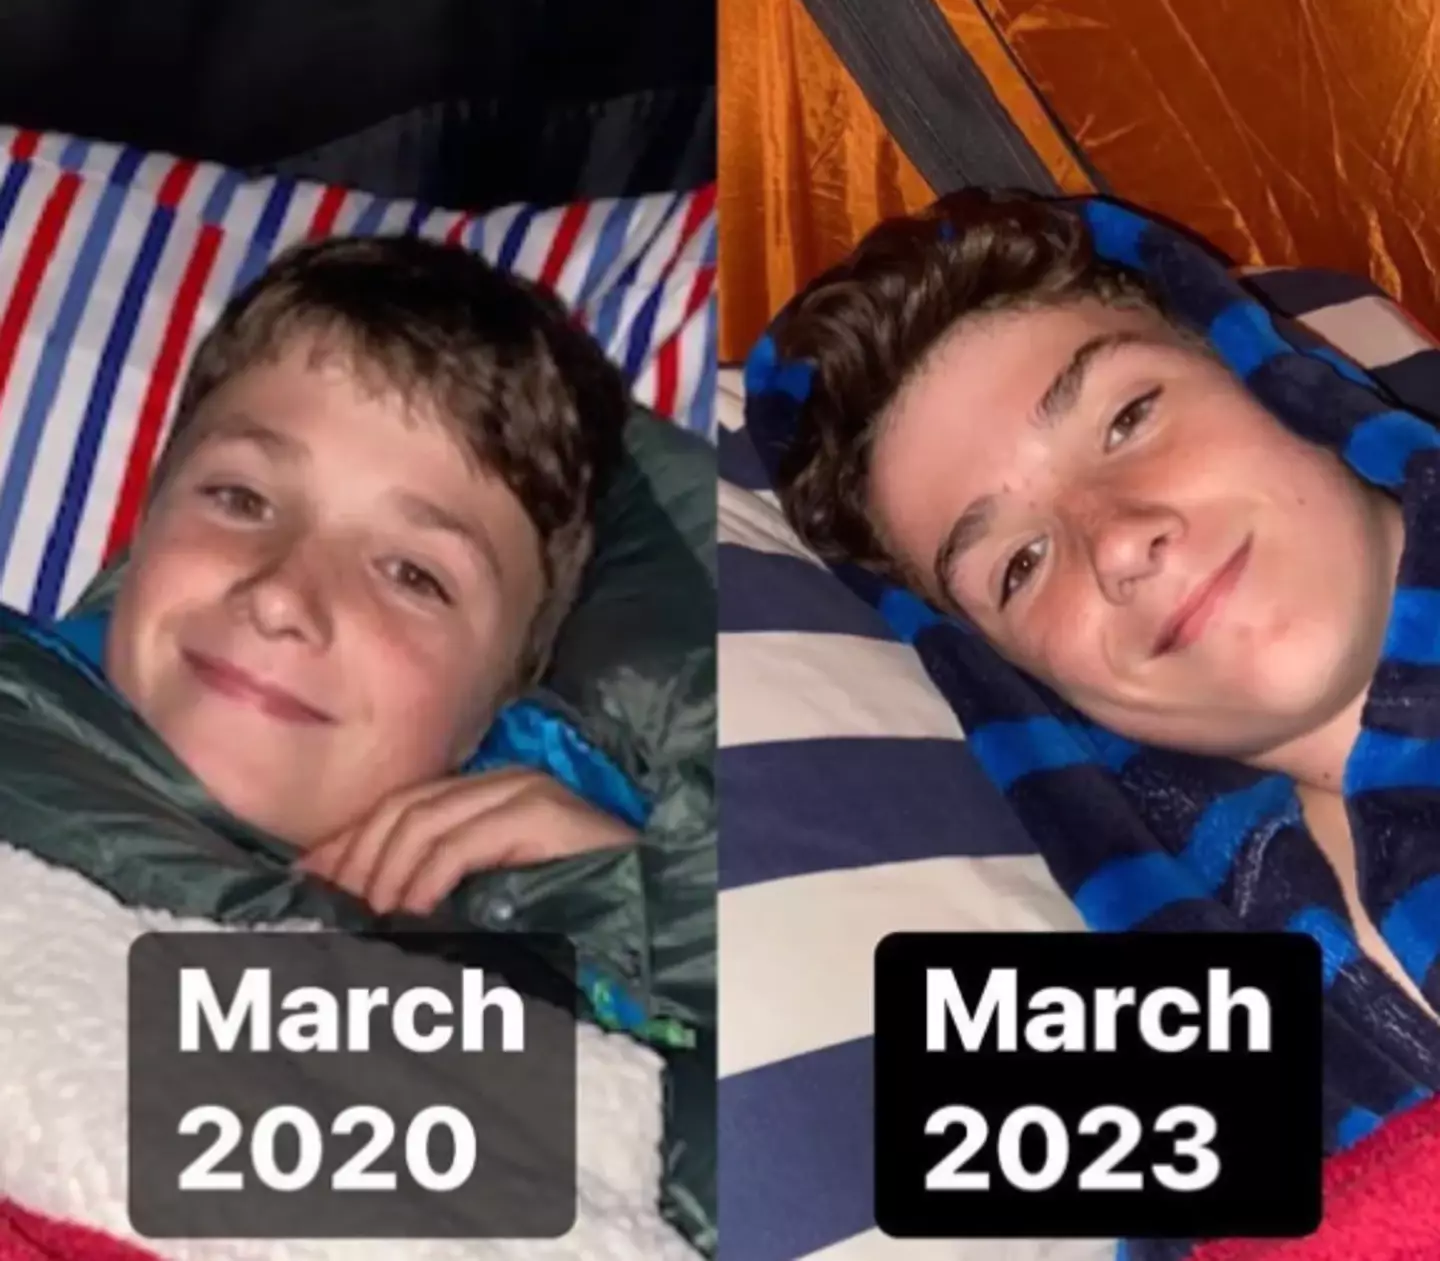 Max started the campout in March 2020.